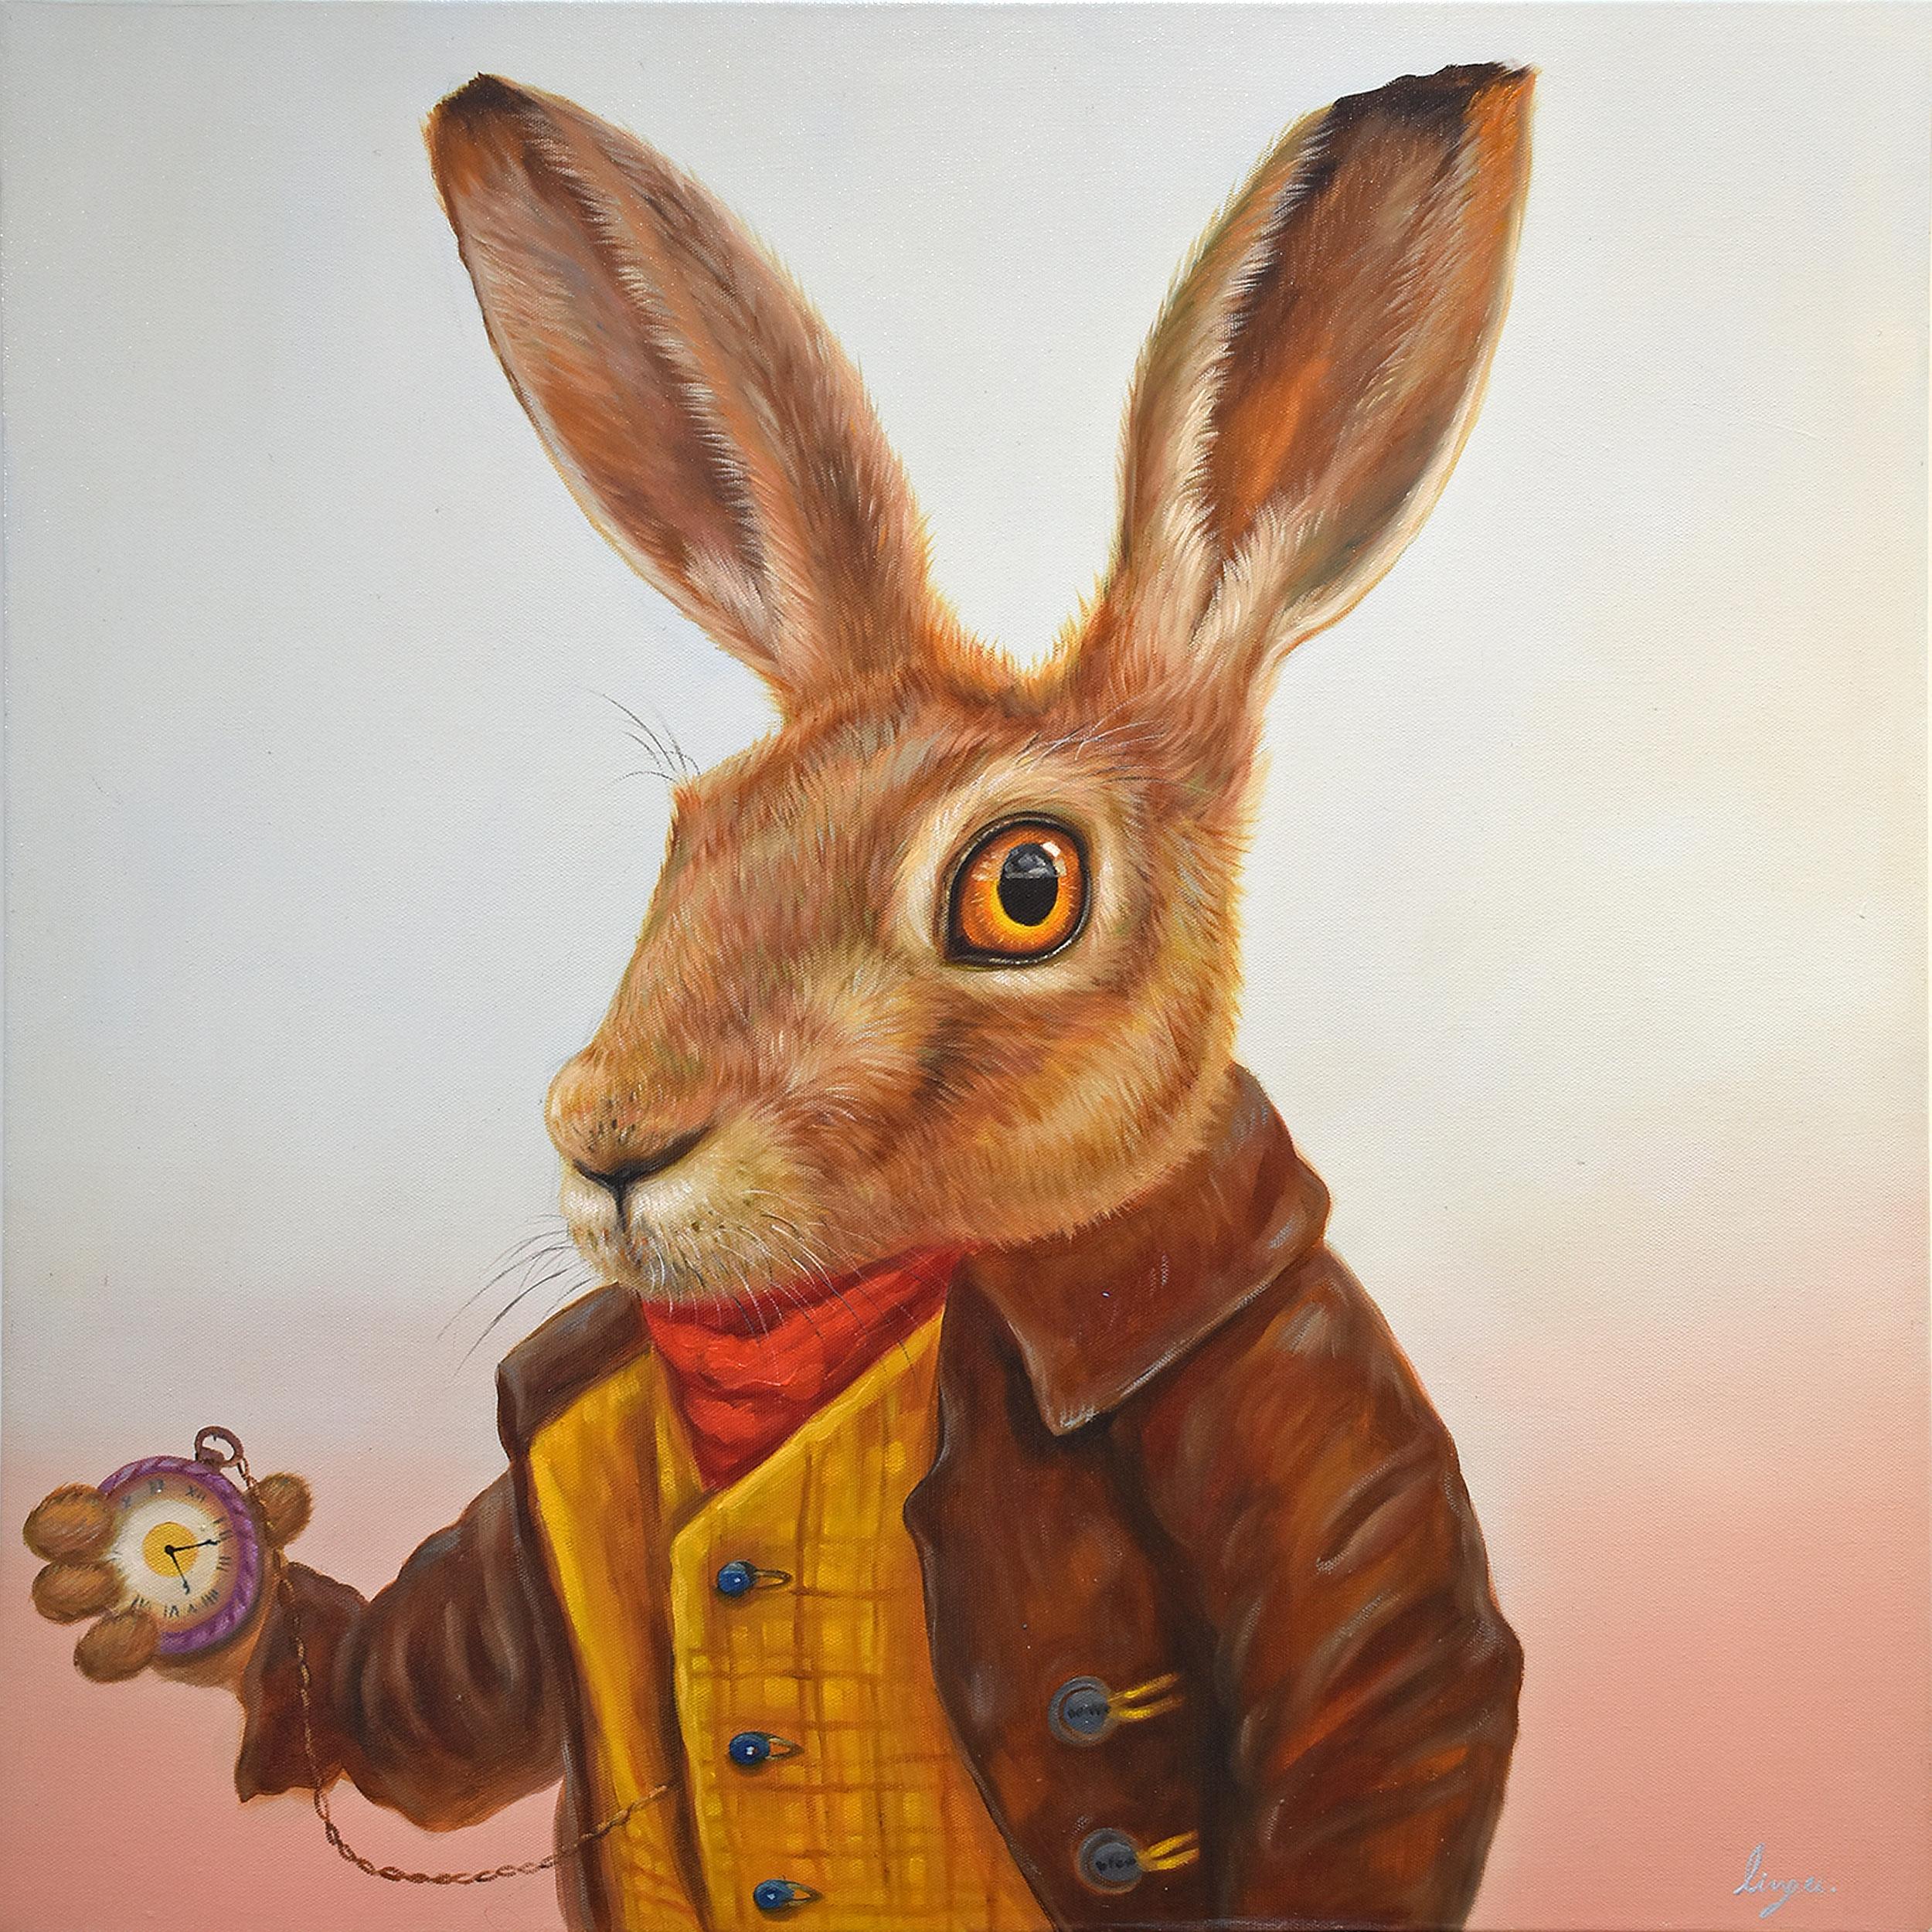 Lingee Bangkhuntod Animal Painting - Dapper Rabbits - Mr. O'Hare. Rabbit in Vintage Clothing. Oil Painting